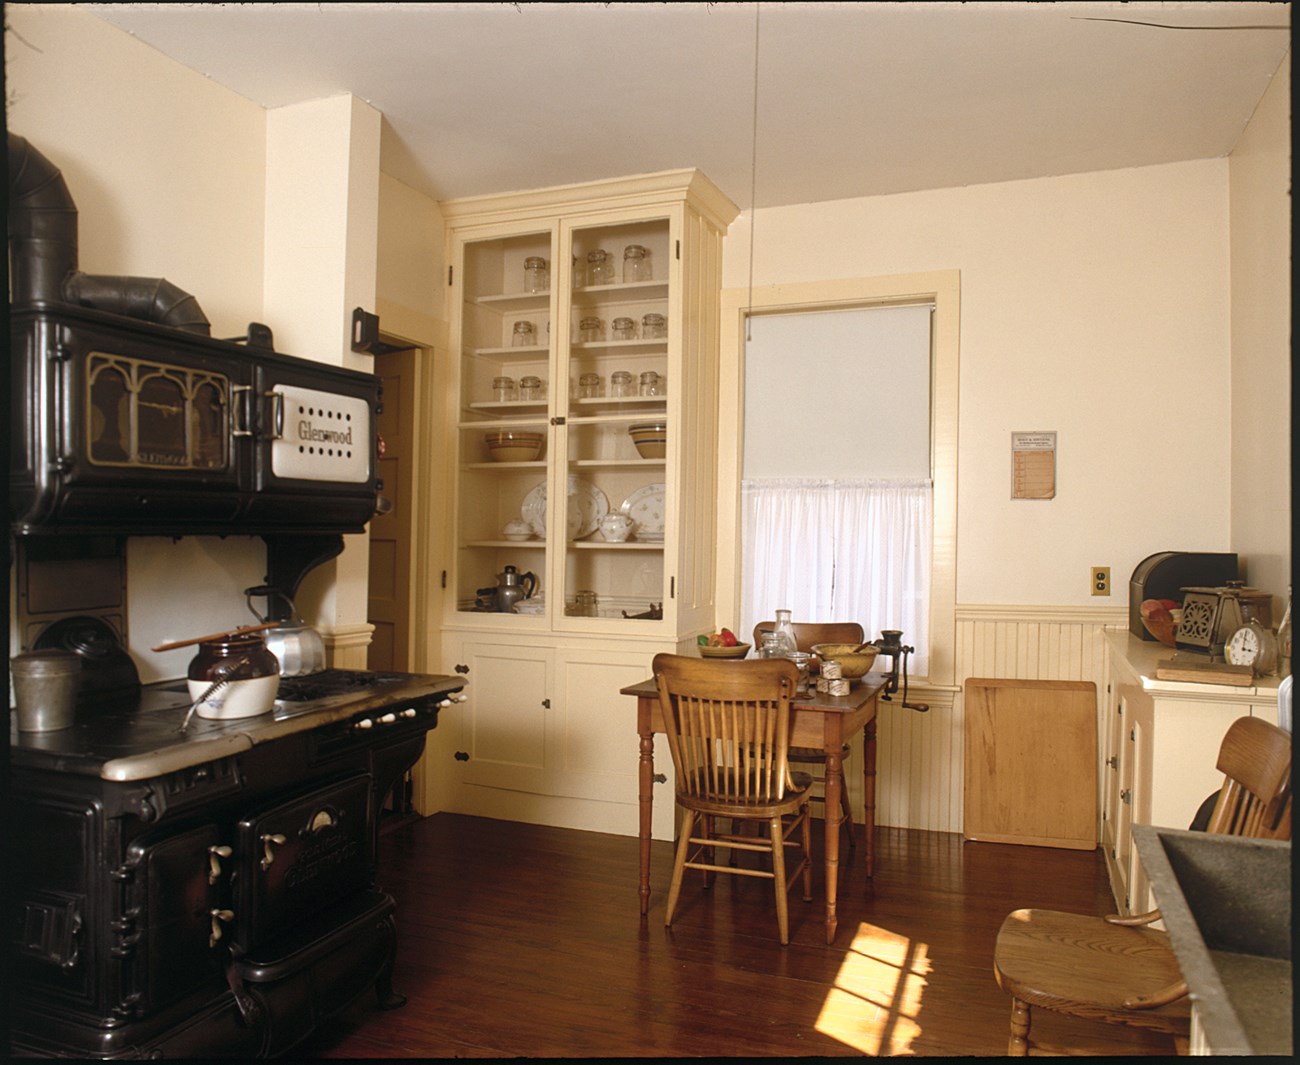 A photo of a small kitchen with off white walls. On the left is a black stove, on which sit a bucket, a beanpot, and a teakettle. In the back left corner is a cabinet, containing glass jars, ceramics, fine china, and other utensils.